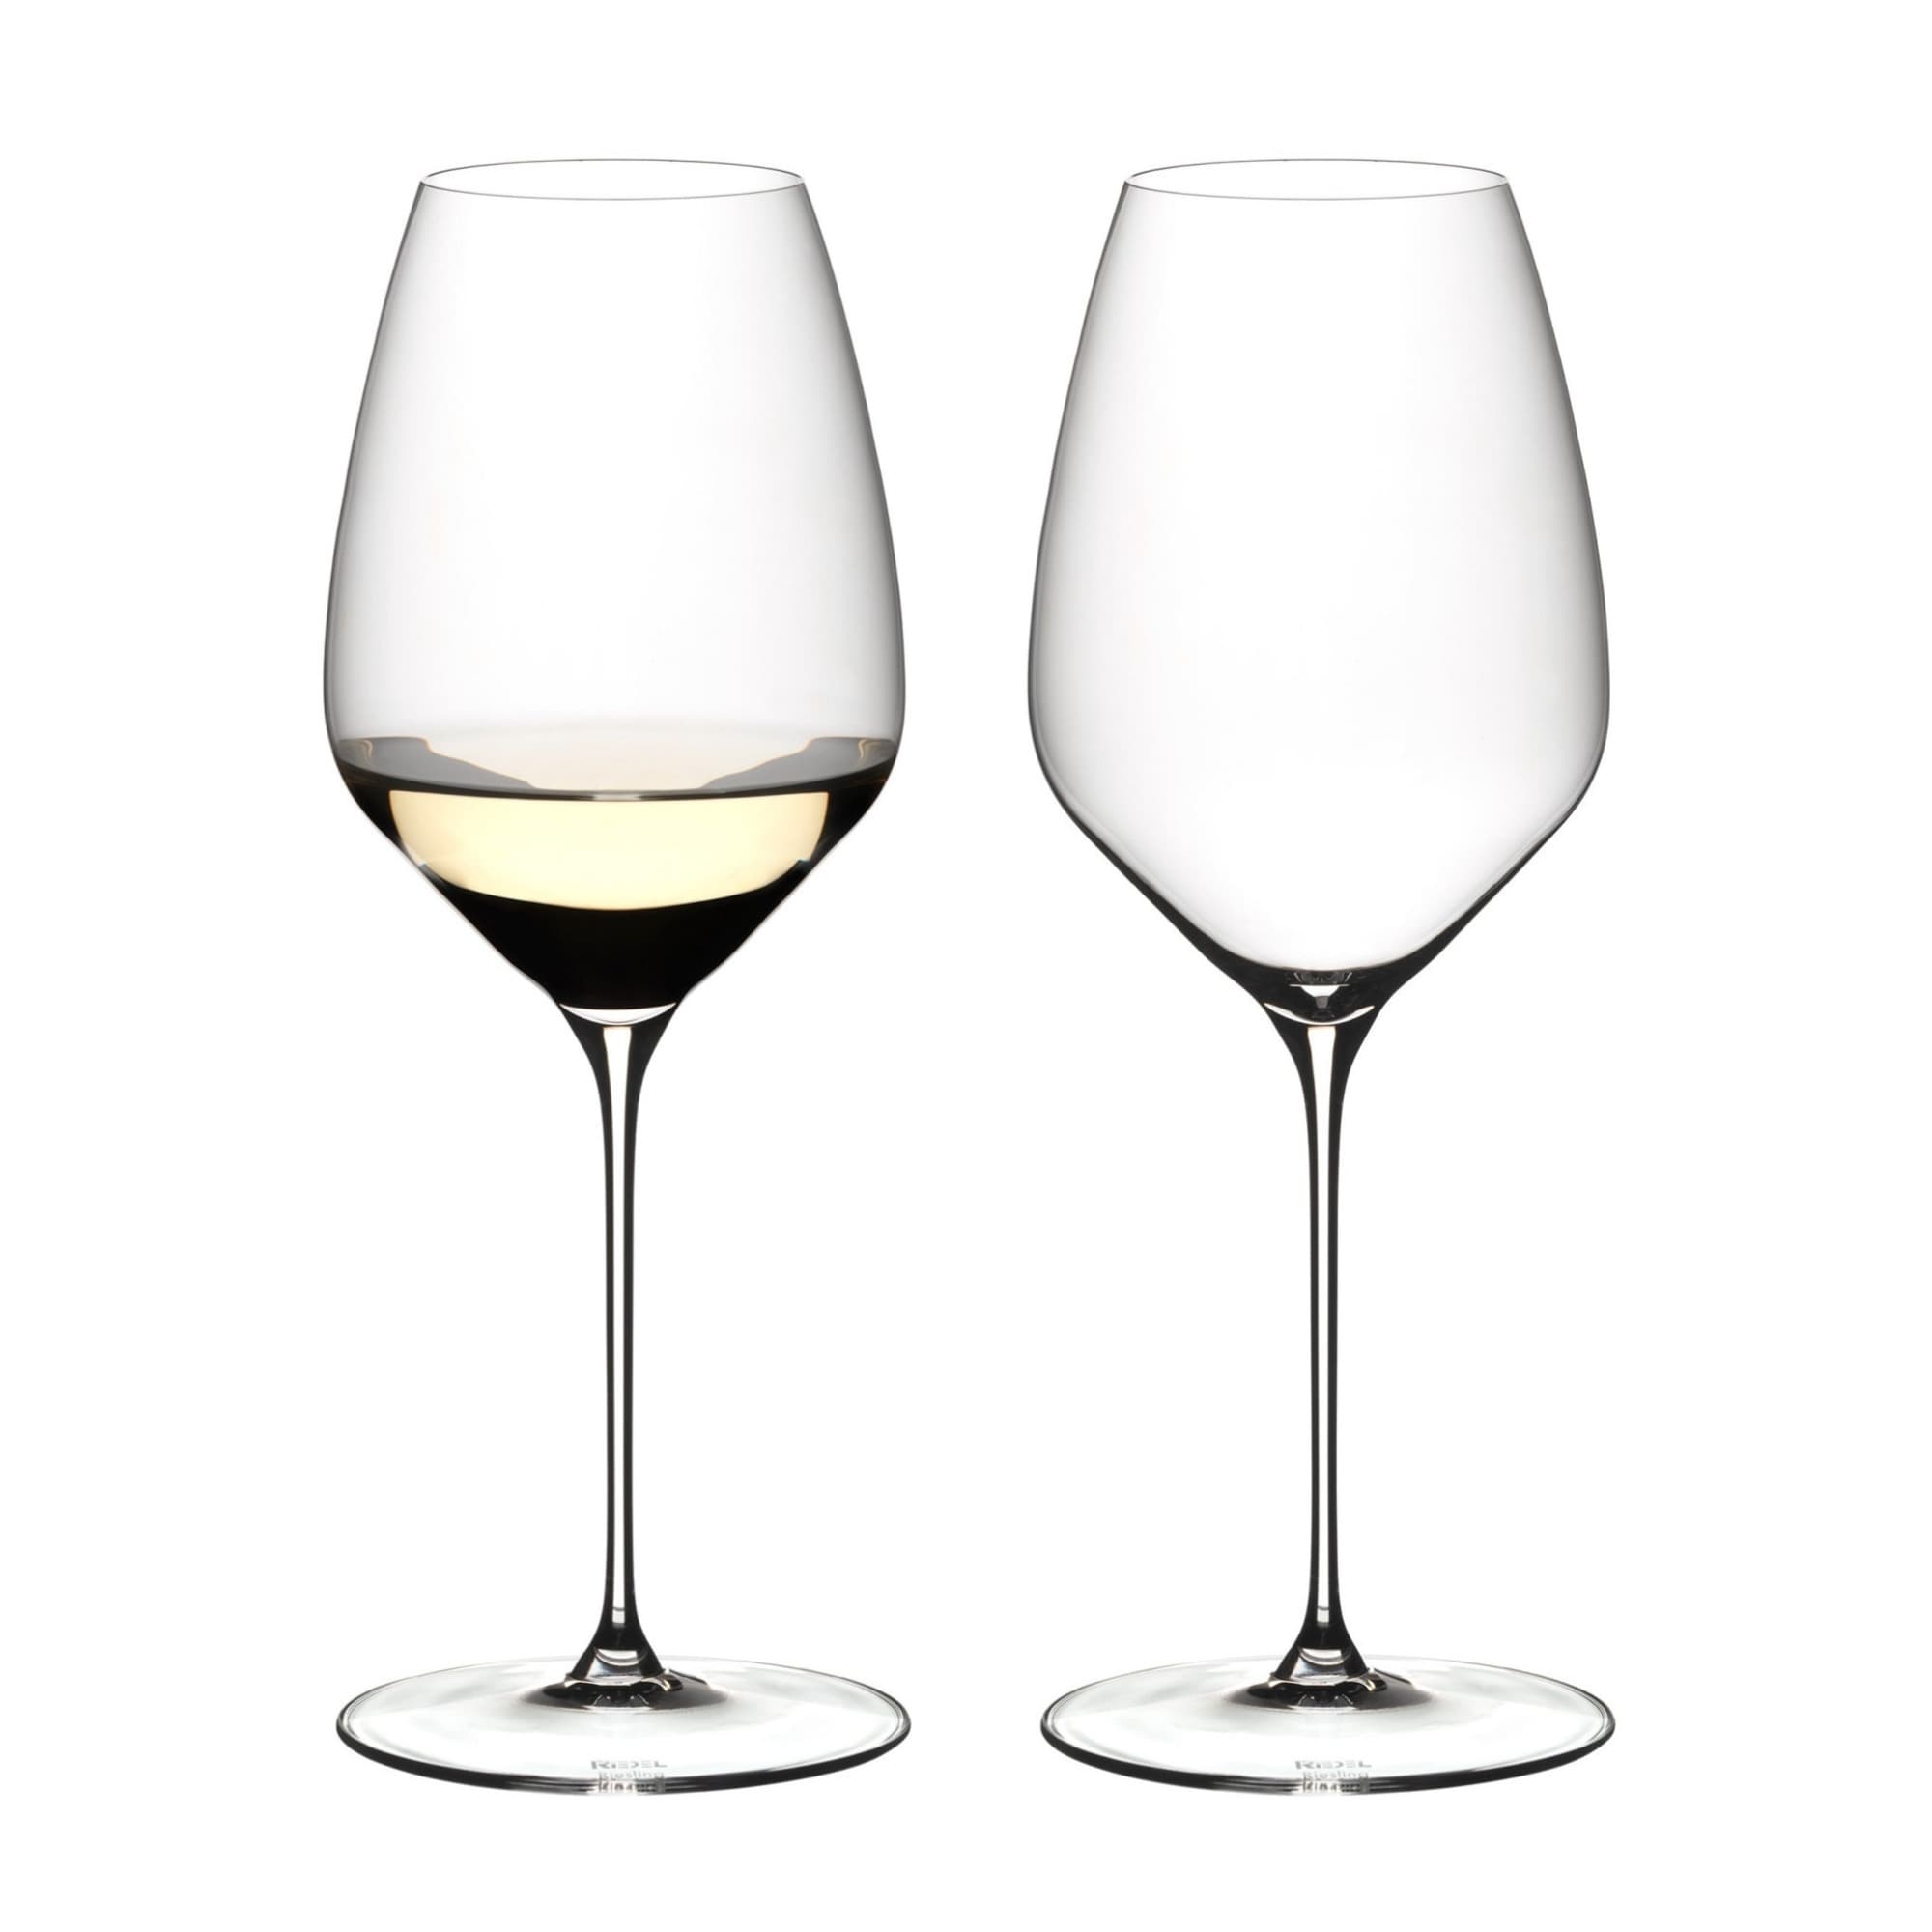 https://ak1.ostkcdn.com/images/products/is/images/direct/fba62928d0d9c16614214655724f5b08d7206a59/Riedel-Veloce-Riesling-Glasses-%28Set-of-2%29.jpg